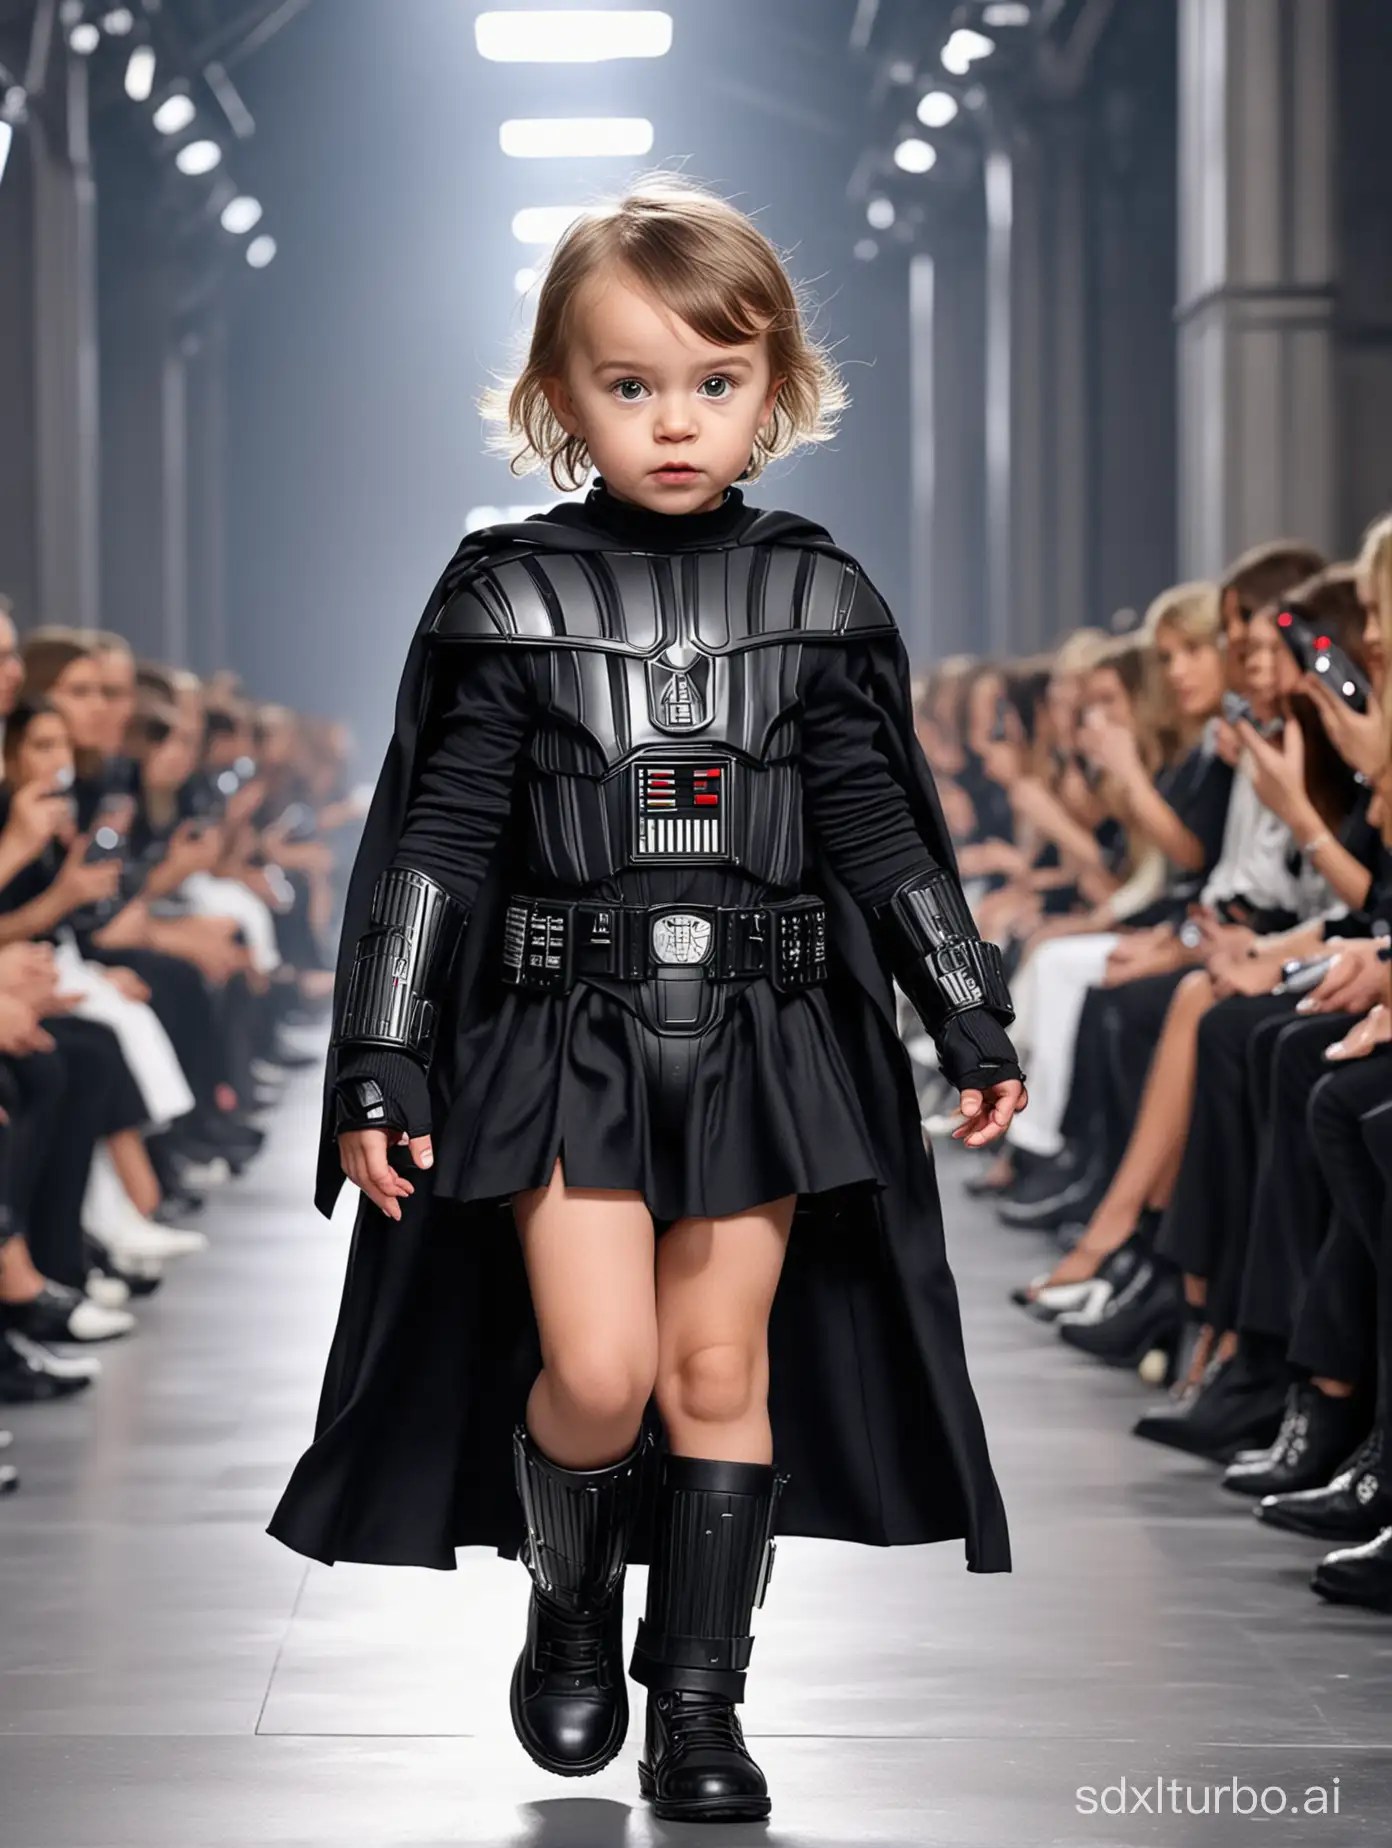 In Paris Collection, a baby modeled after Darth Vader walks the runway, a baby👶 top model, walking, (full-body image), (audience on both sides), the runway of Paris Collection, lightsaber, the runway of Paris Collection, (eccentric fashion), outrageous fashion, flashy fashion, Paris Collection